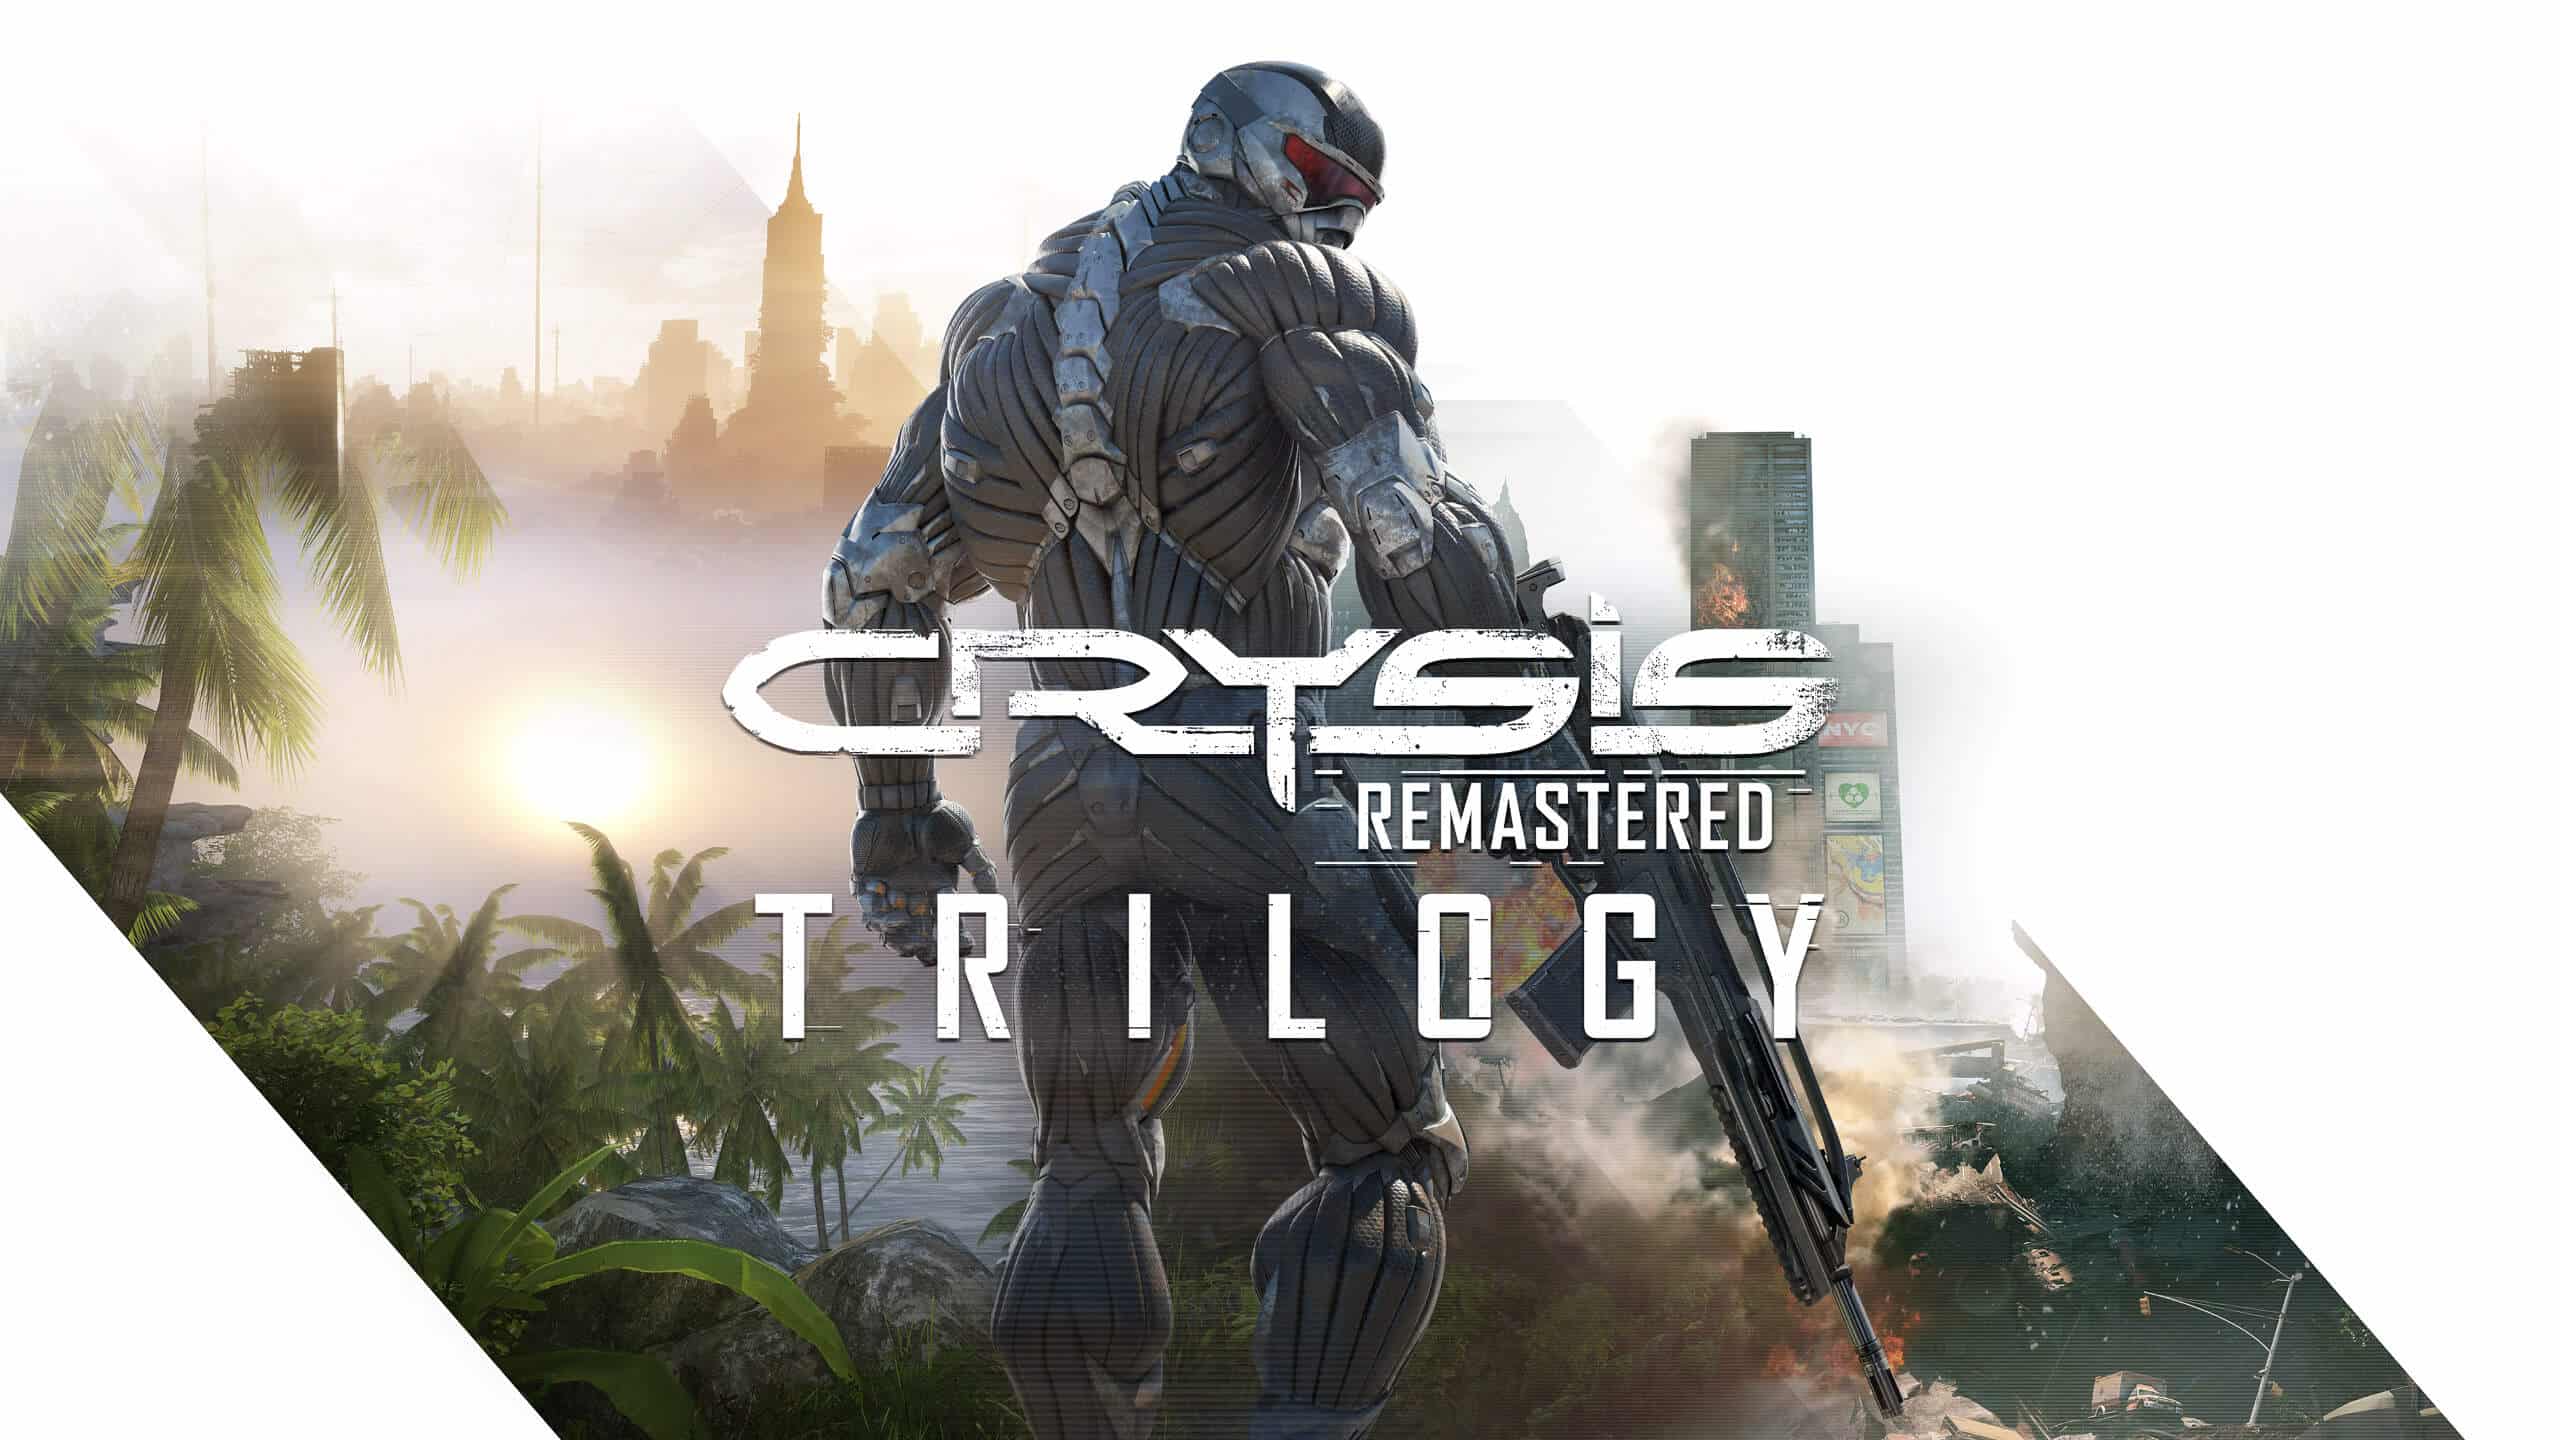 Crysis Remastered Trilogy Cheats